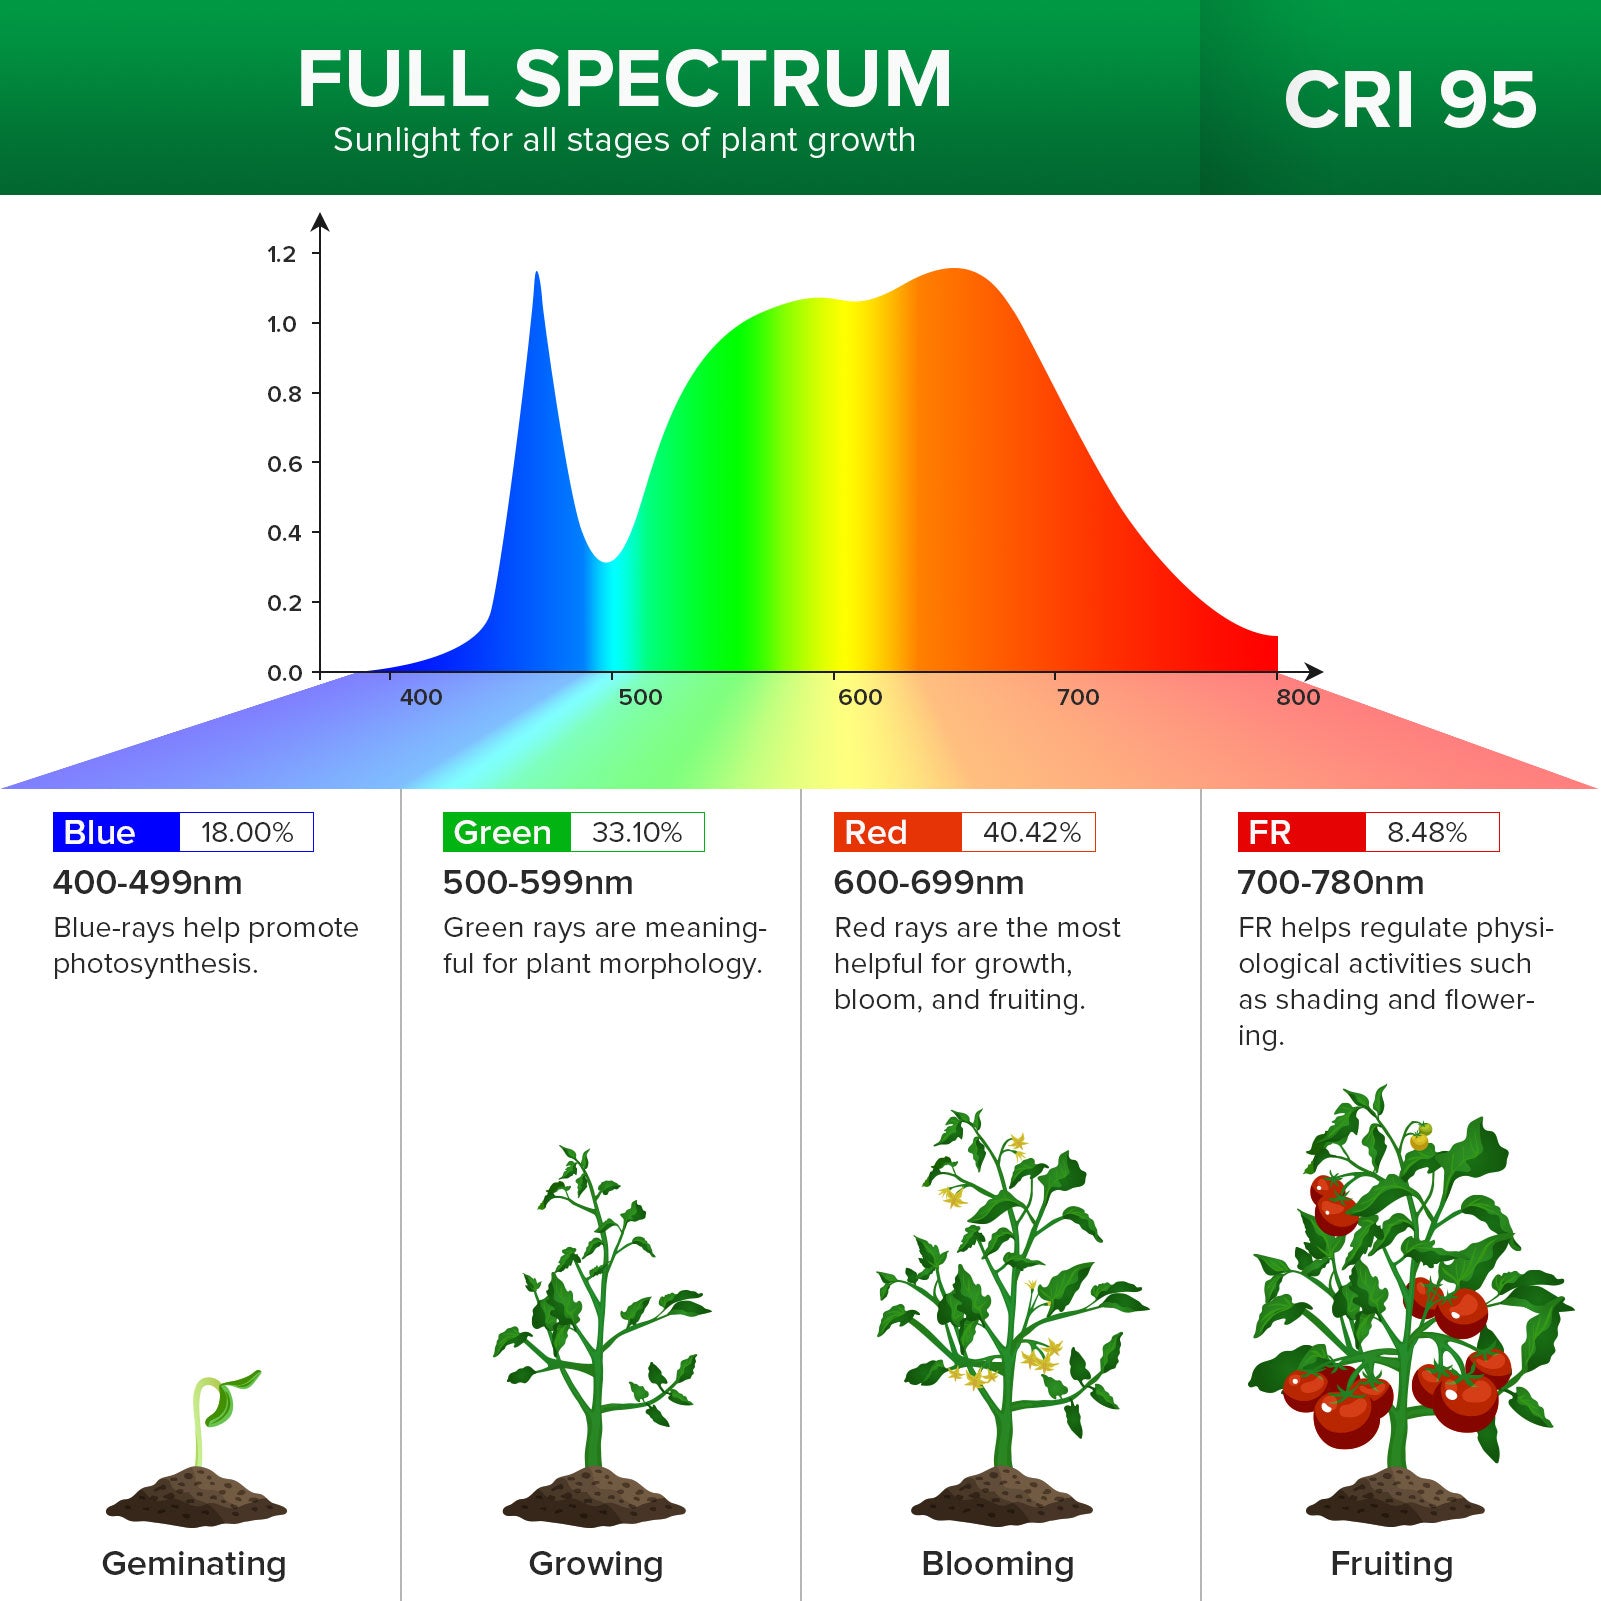 Full spectrum,CRI 95, Sunlight for all stages of plant growth.